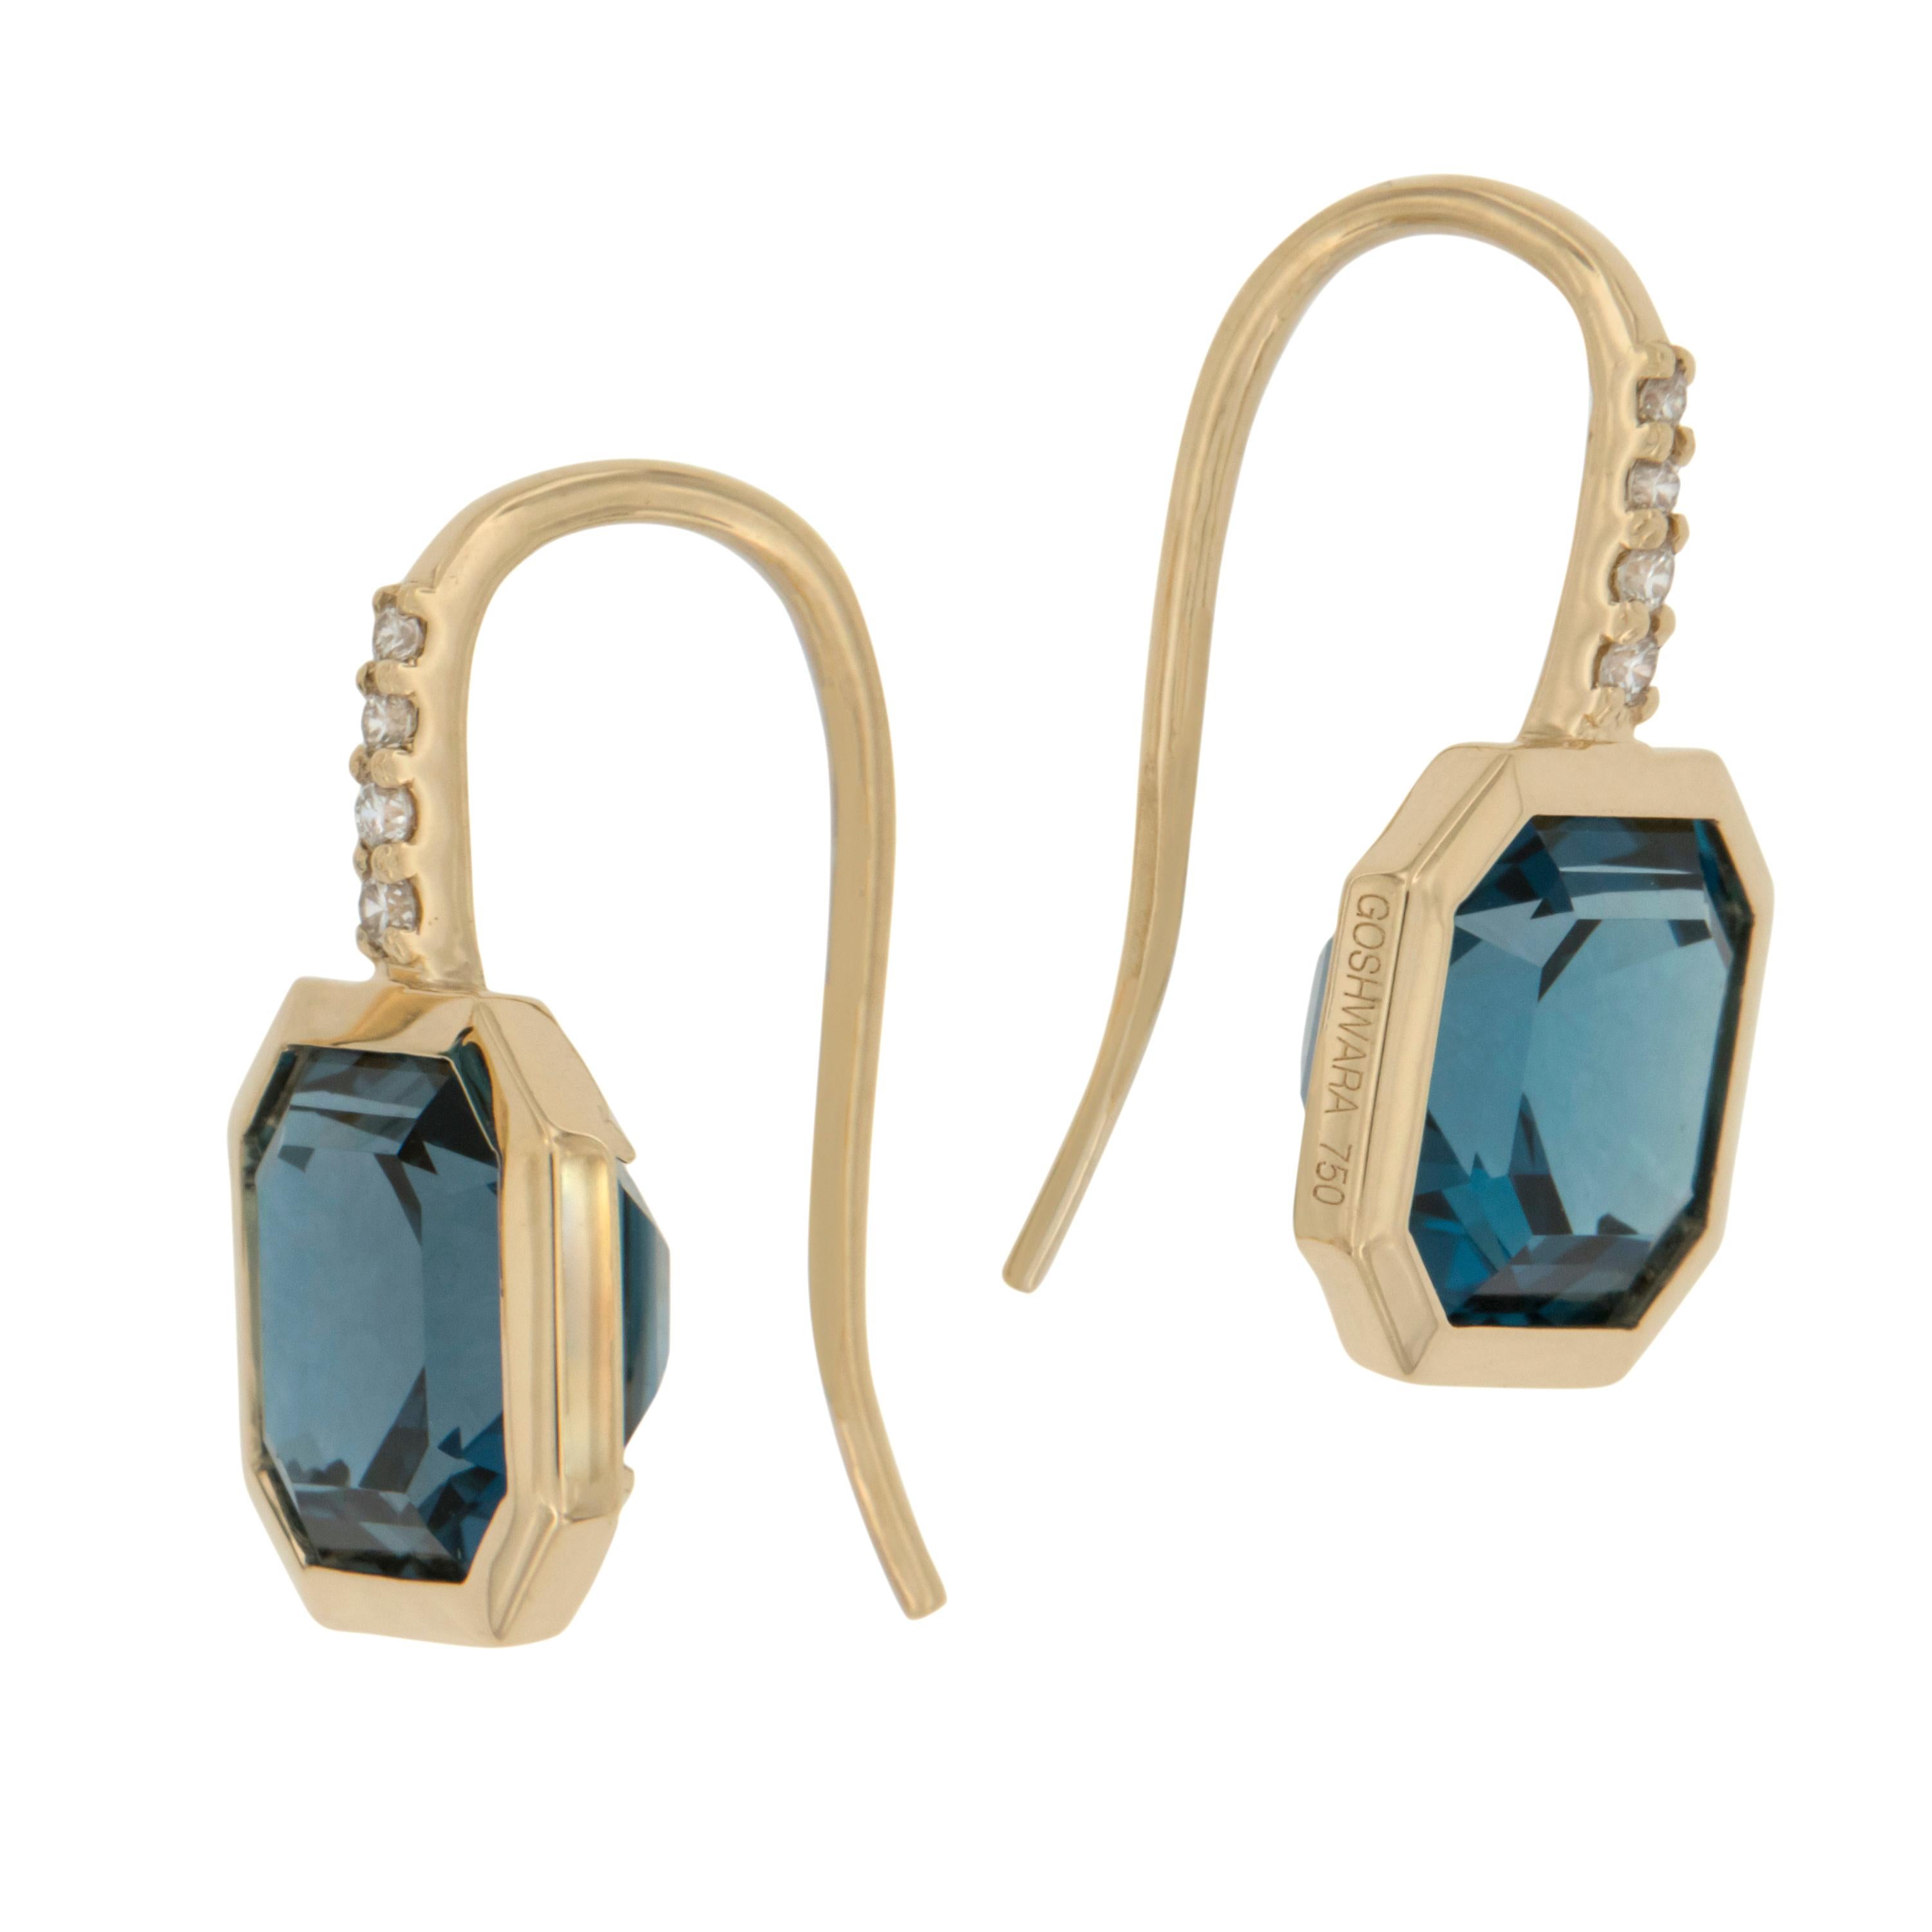 You will be the topic of envious gossip while wearing these fetching earrings! Goshwara, a term for perfect shape, is a company known for exceptional color gems & craftsmanship. From their Gossip Collection, these 18 karat yellow gold earrings